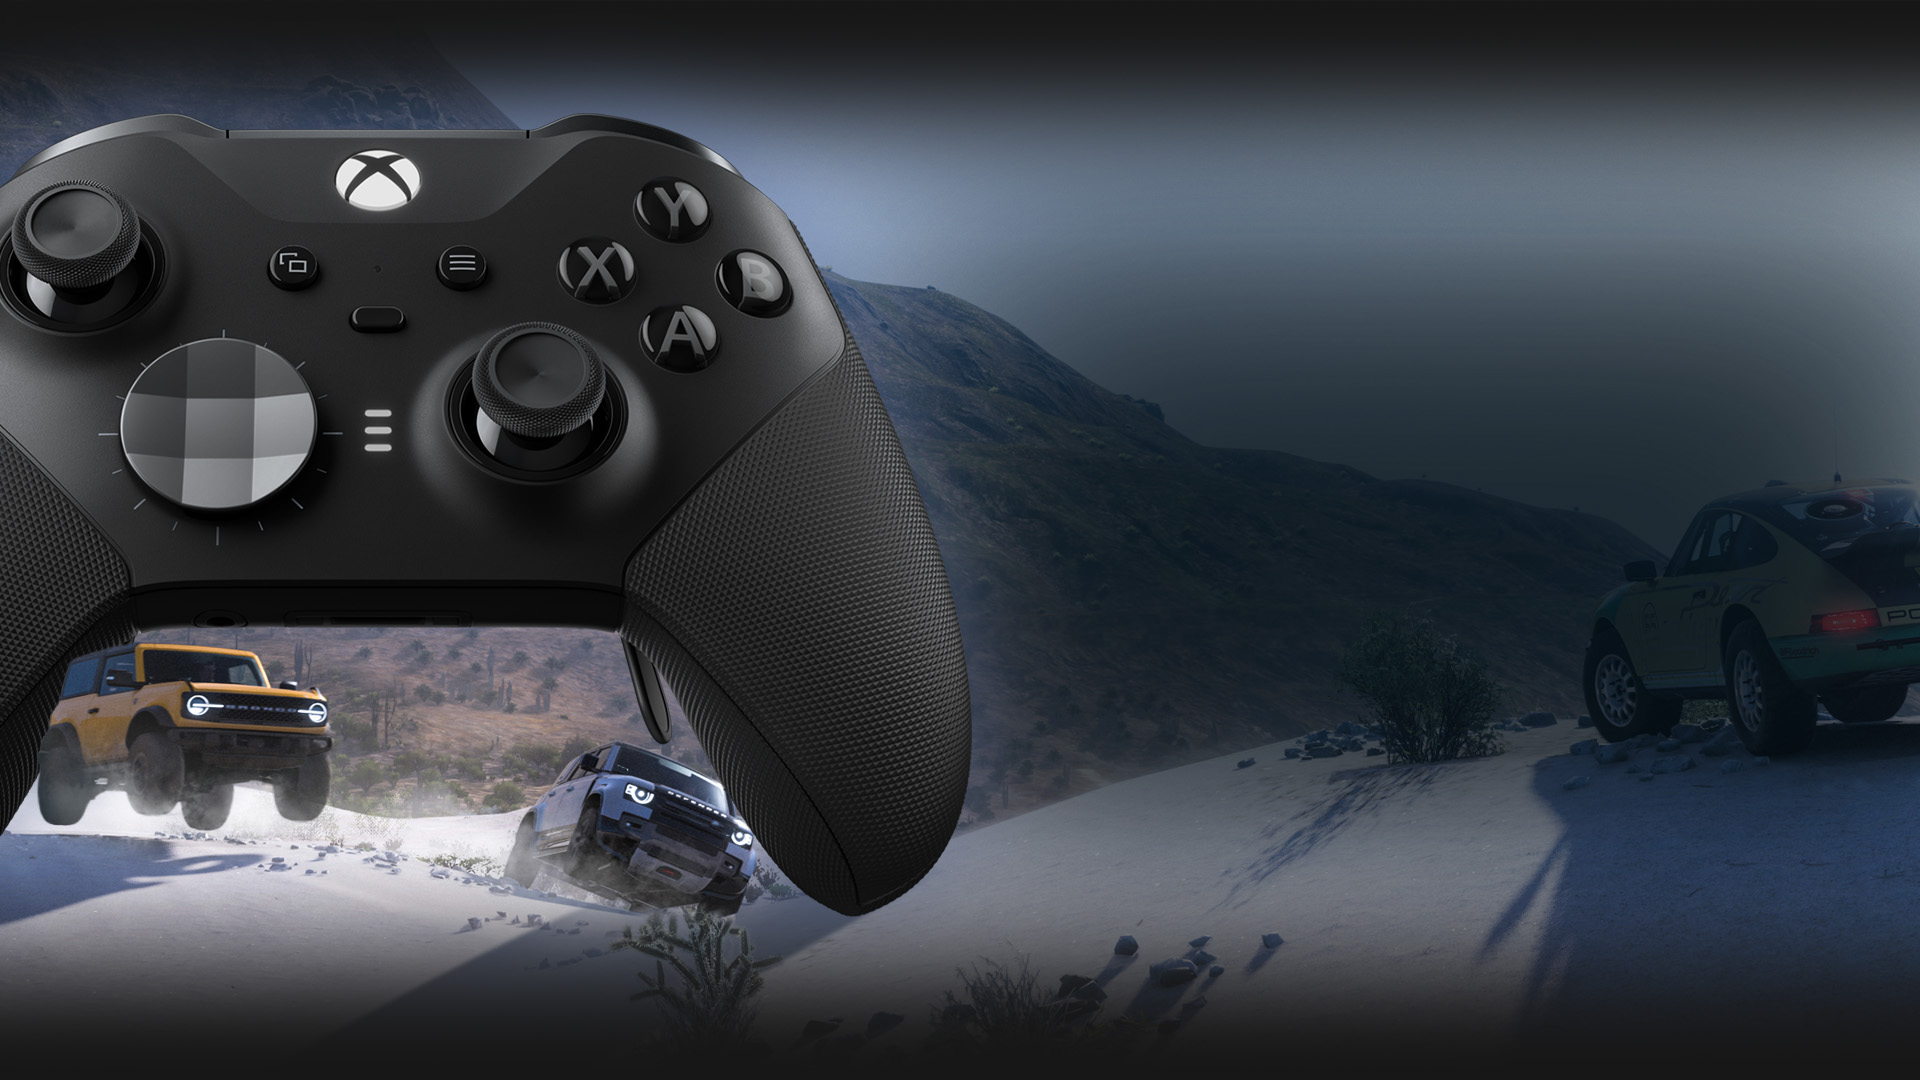 A Ford Bronco and Land Rover Defender race through the snow underneath the Xbox Elite Wireless Controller Series 2.